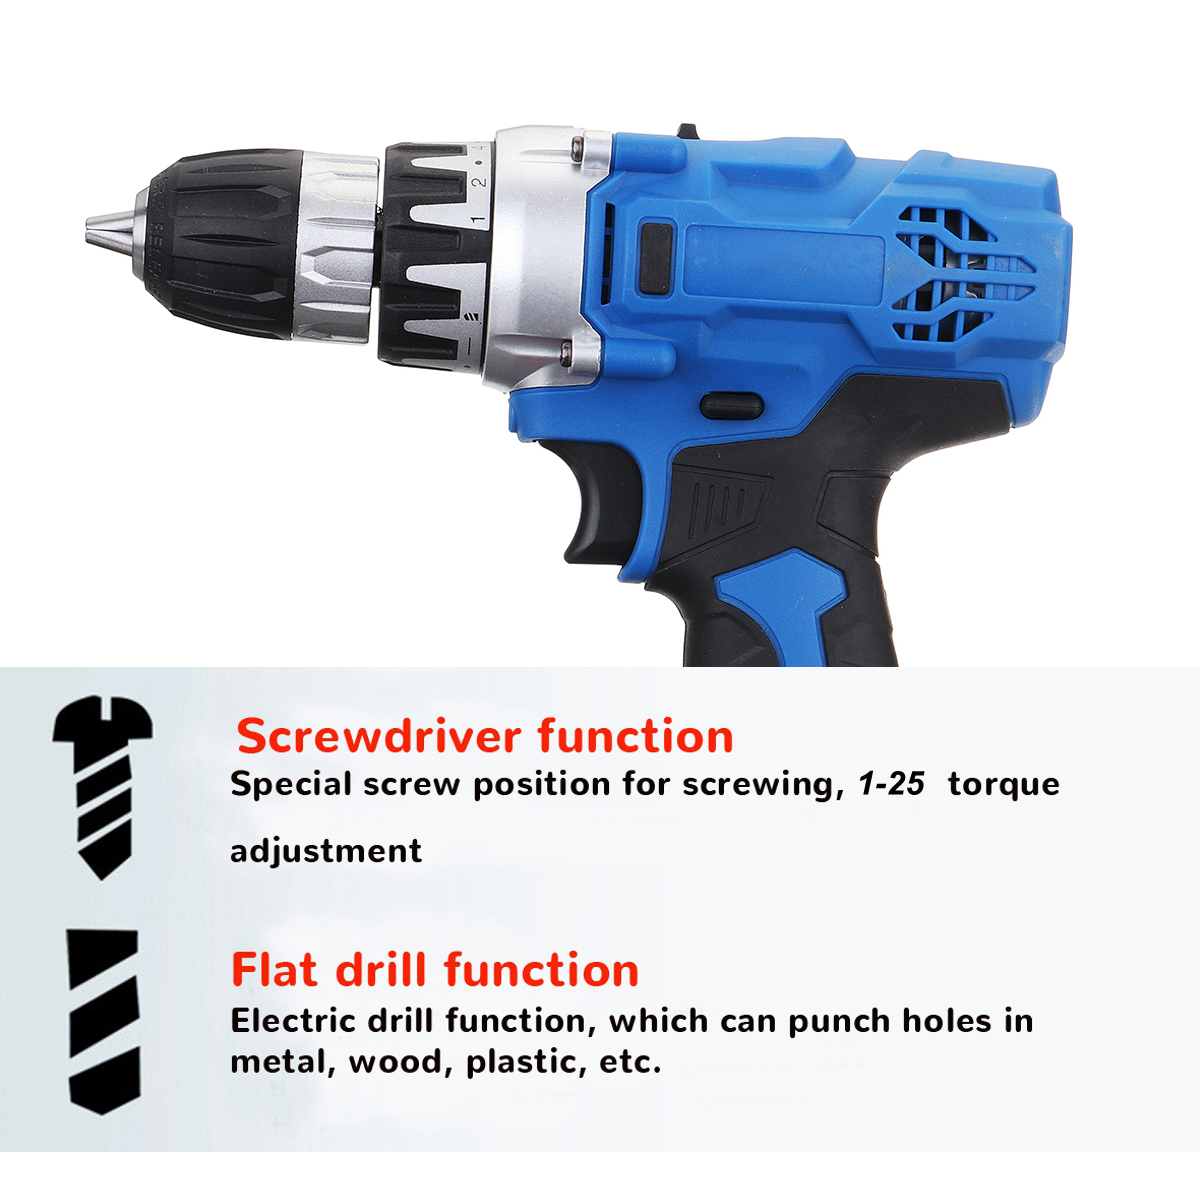 36V-Cordless-Power-Drill-Set-Double-Speed-Electric-Screwdriver-Drill-Power-Display-W-1-or-2-Li-Ion-B-1435859-3